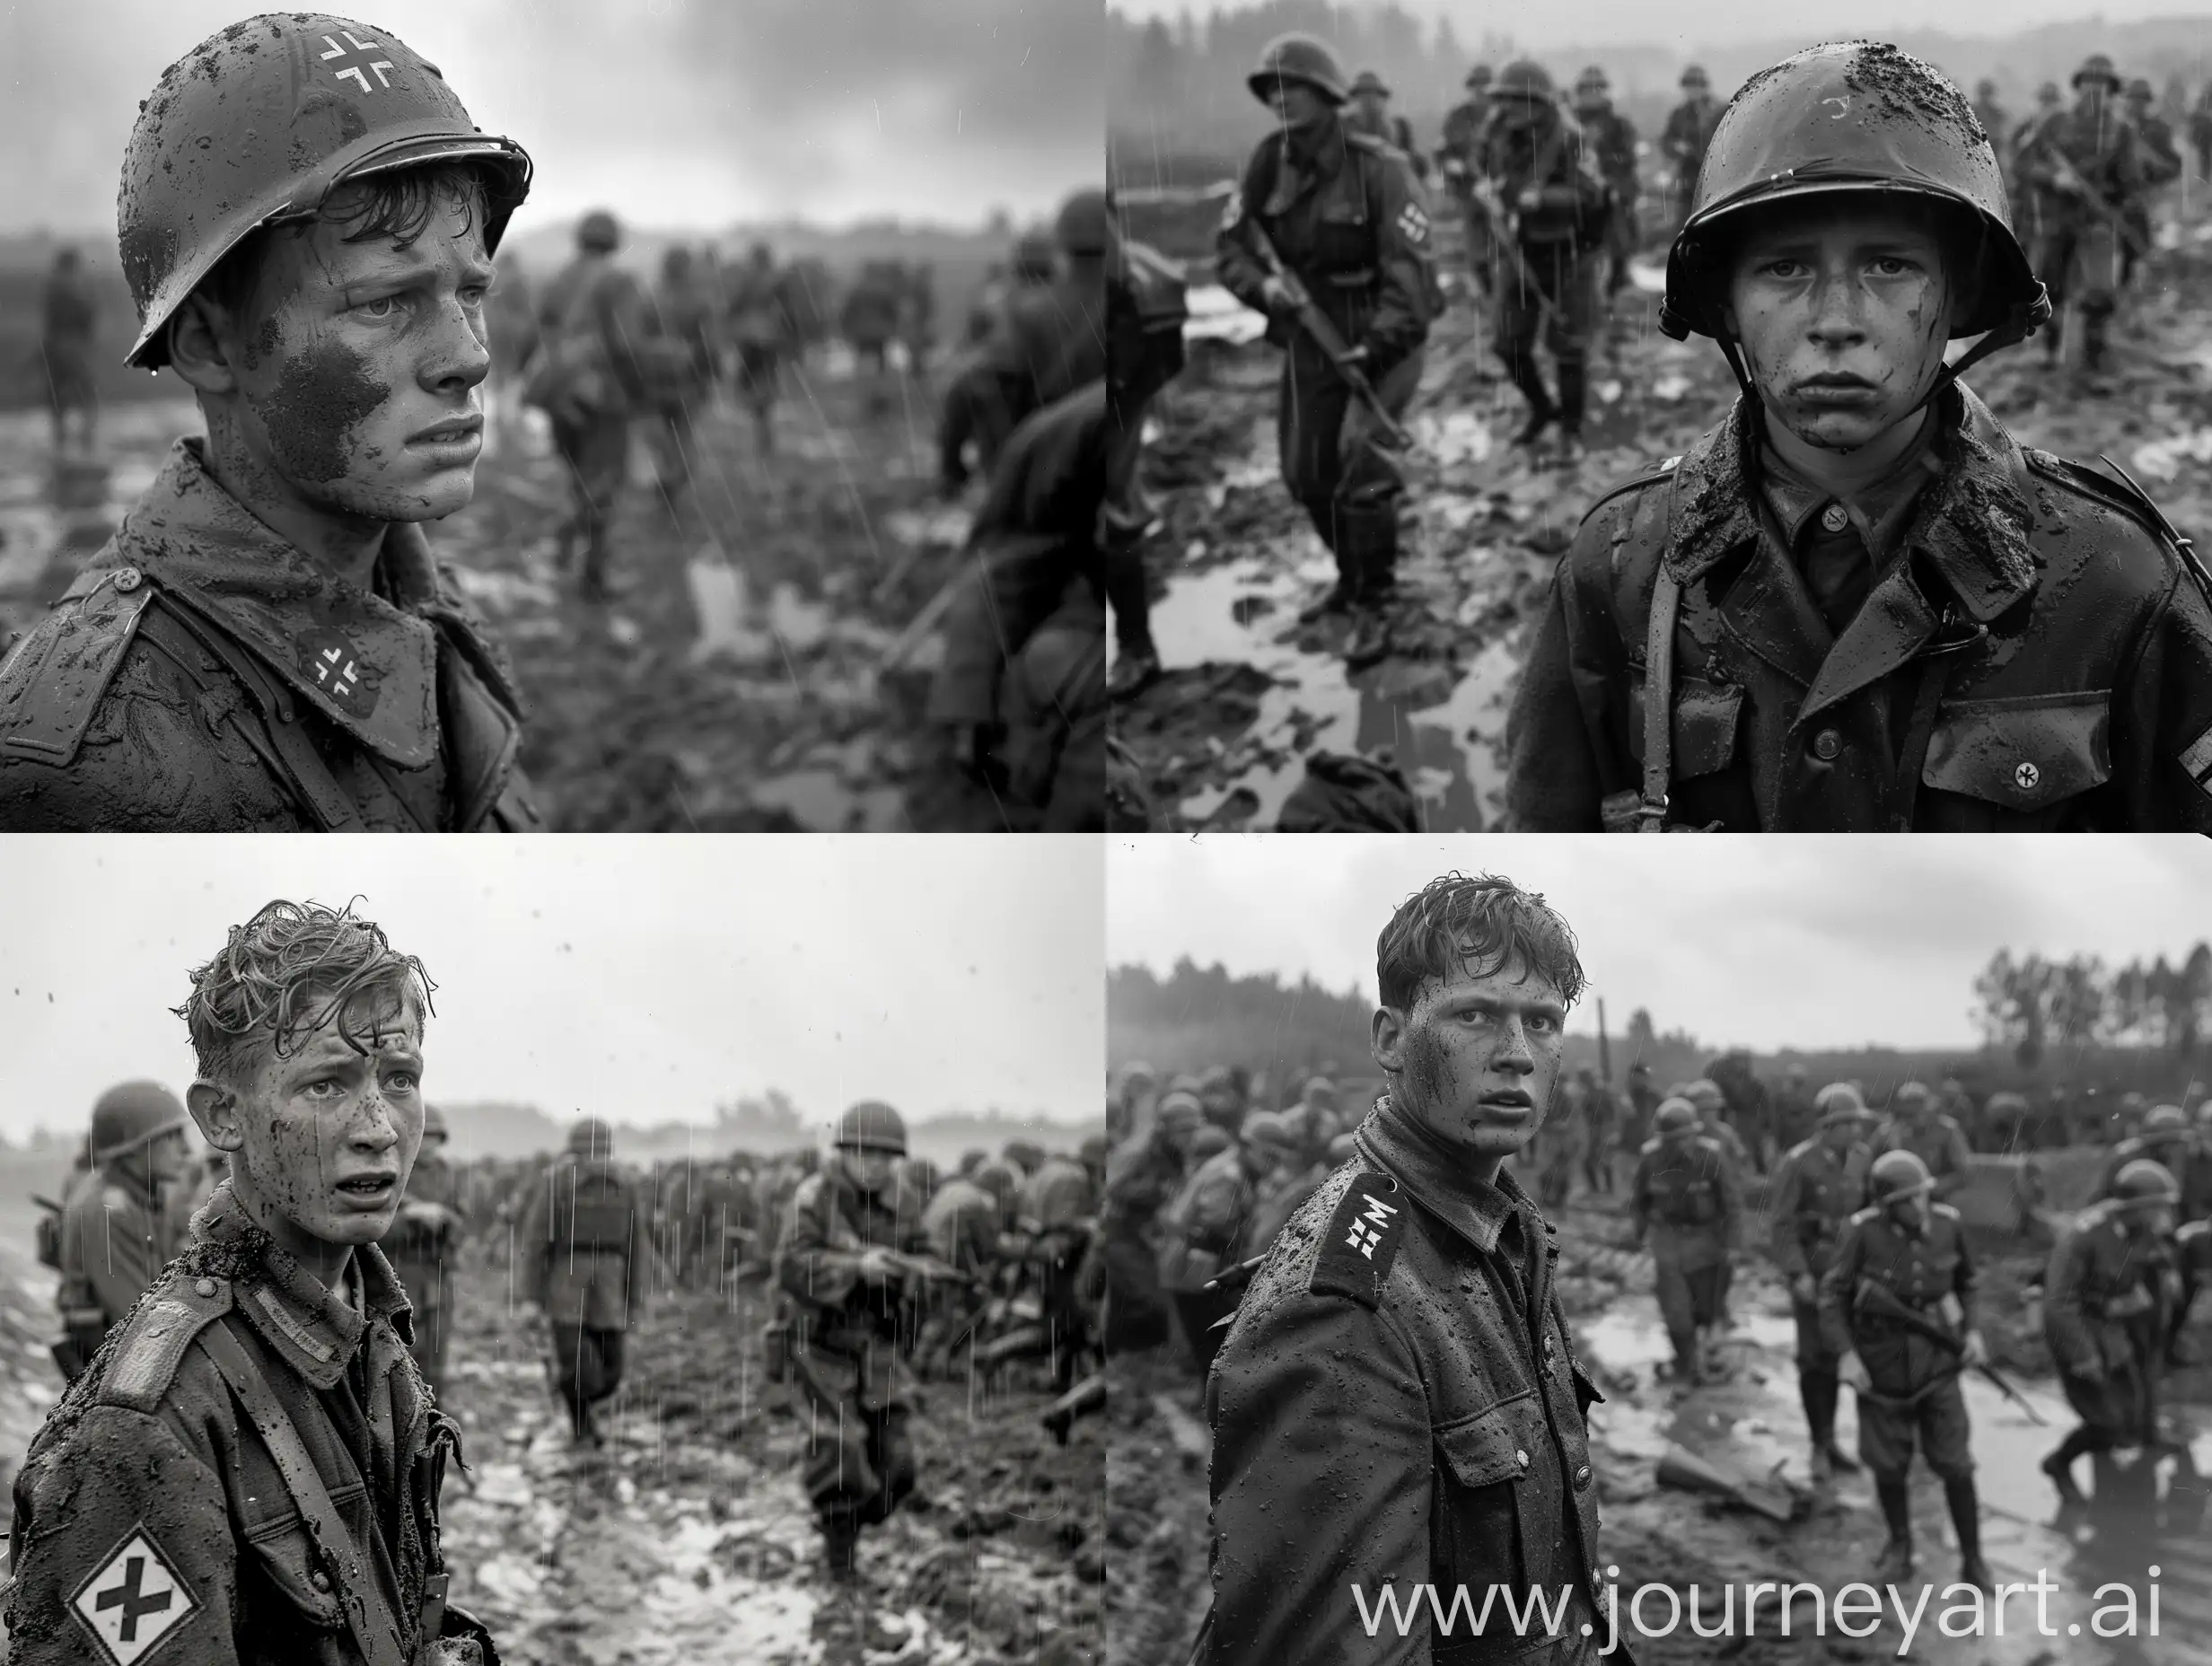 WW2 German soldier, young, looking lost, mud, rain, lots of panicked soldiers in the background